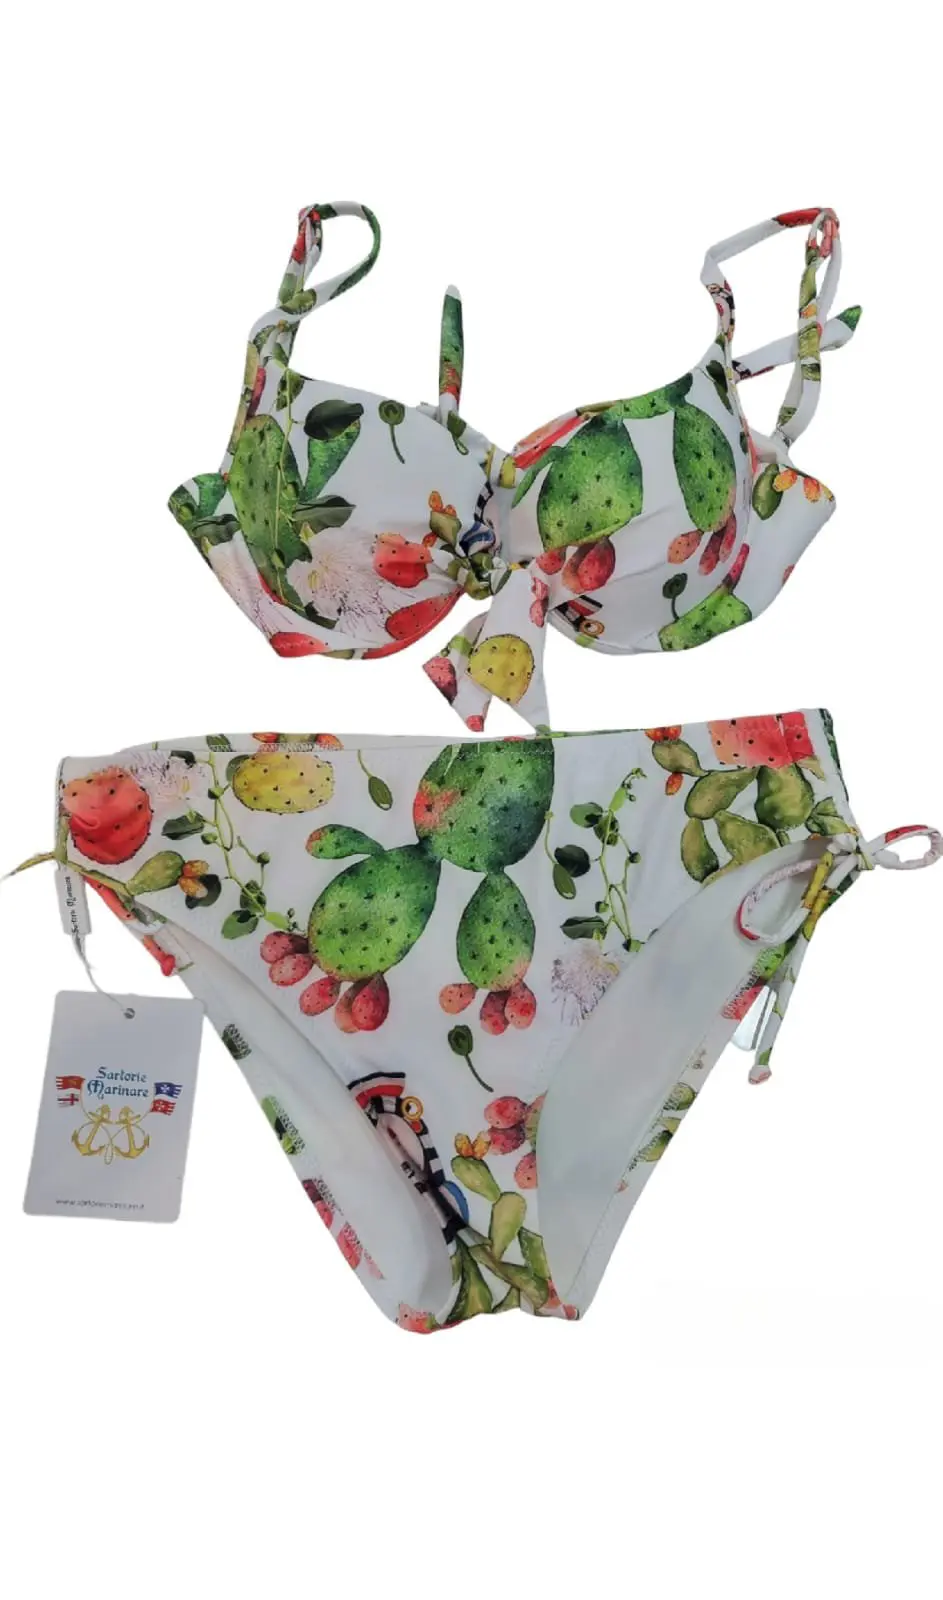 Bikini with cactus bow cup and dark brown heads, culisse briefs. Adjustable straps